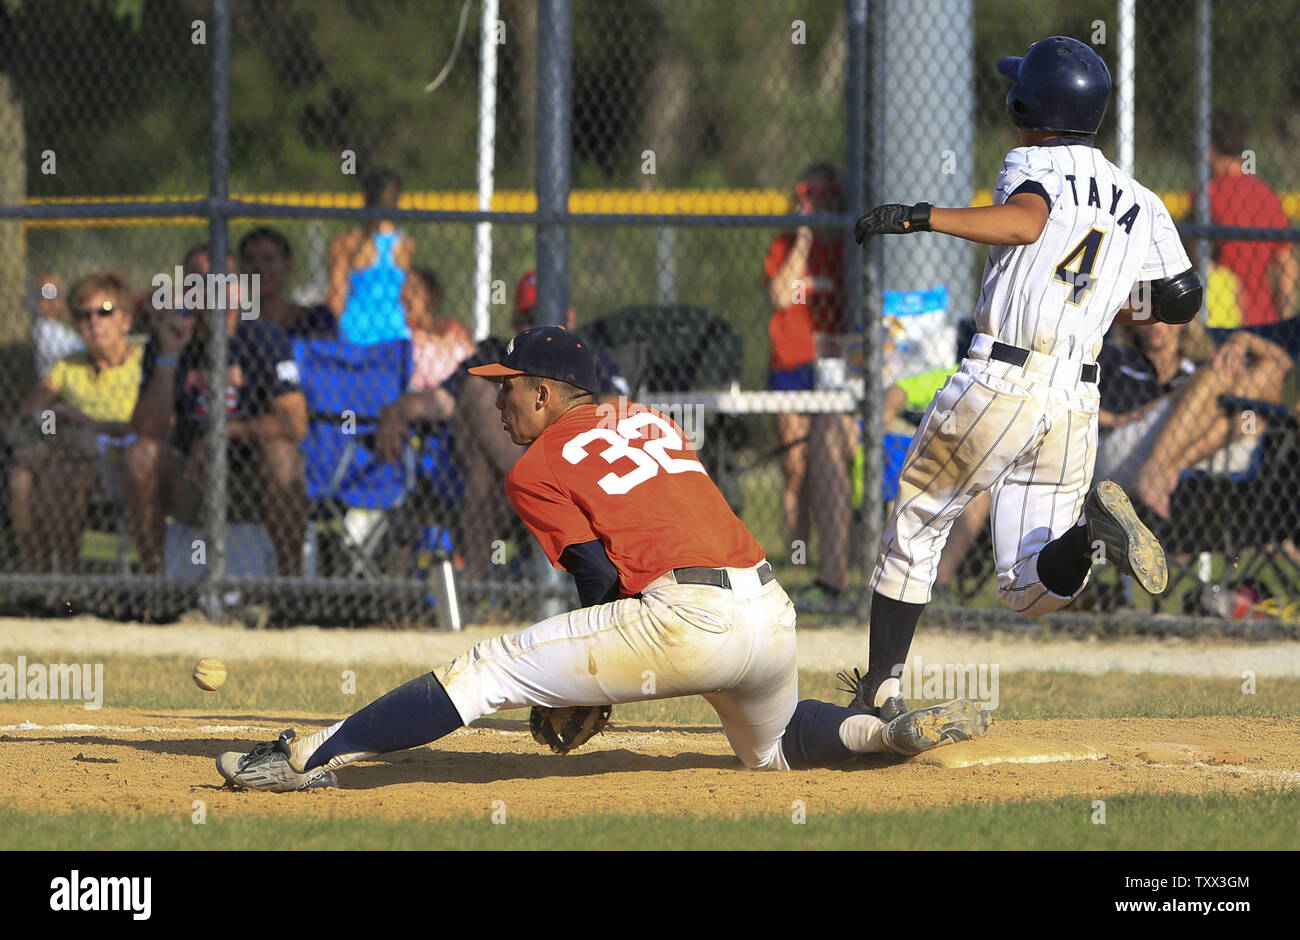 Japan's Ryuta Itaya (R) beats the throw to Los Lomas Potros first baseman Benjamin Negron (L) during the fourth inning of their first game of the McHenry County Youth Sports Association's 23rd annual 15-Year-Old International Championship on August 1, 2015 in Crystal Lake, Illinois.  Japan lost to Los Lomas Potros 6-4 in their first game but defeated them 3-2 in their second game to win the championship.. Photo by John Konstantaras/UPI Stock Photo